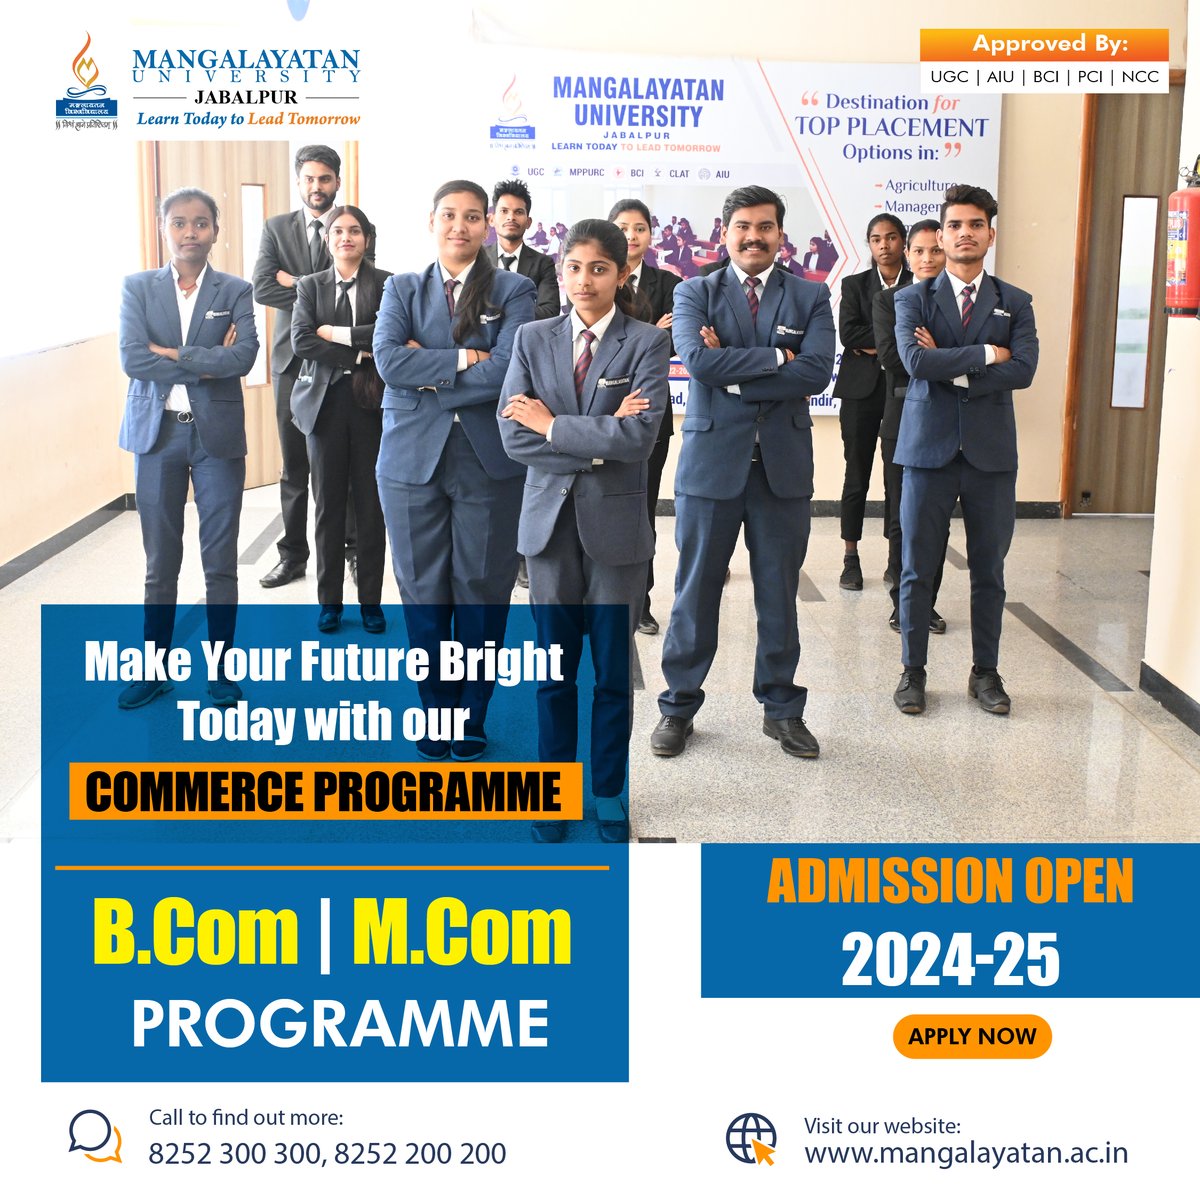 Transforming Ambitions into Achievements in Commerce: Admissions Open for Commerce Courses.
#MangalayatanUniversity #jabalpur #education #Admission #commerce #courses #admission2024 #MCOM #BCOM #commerceinstitue #ApplyNow #Apply #educational